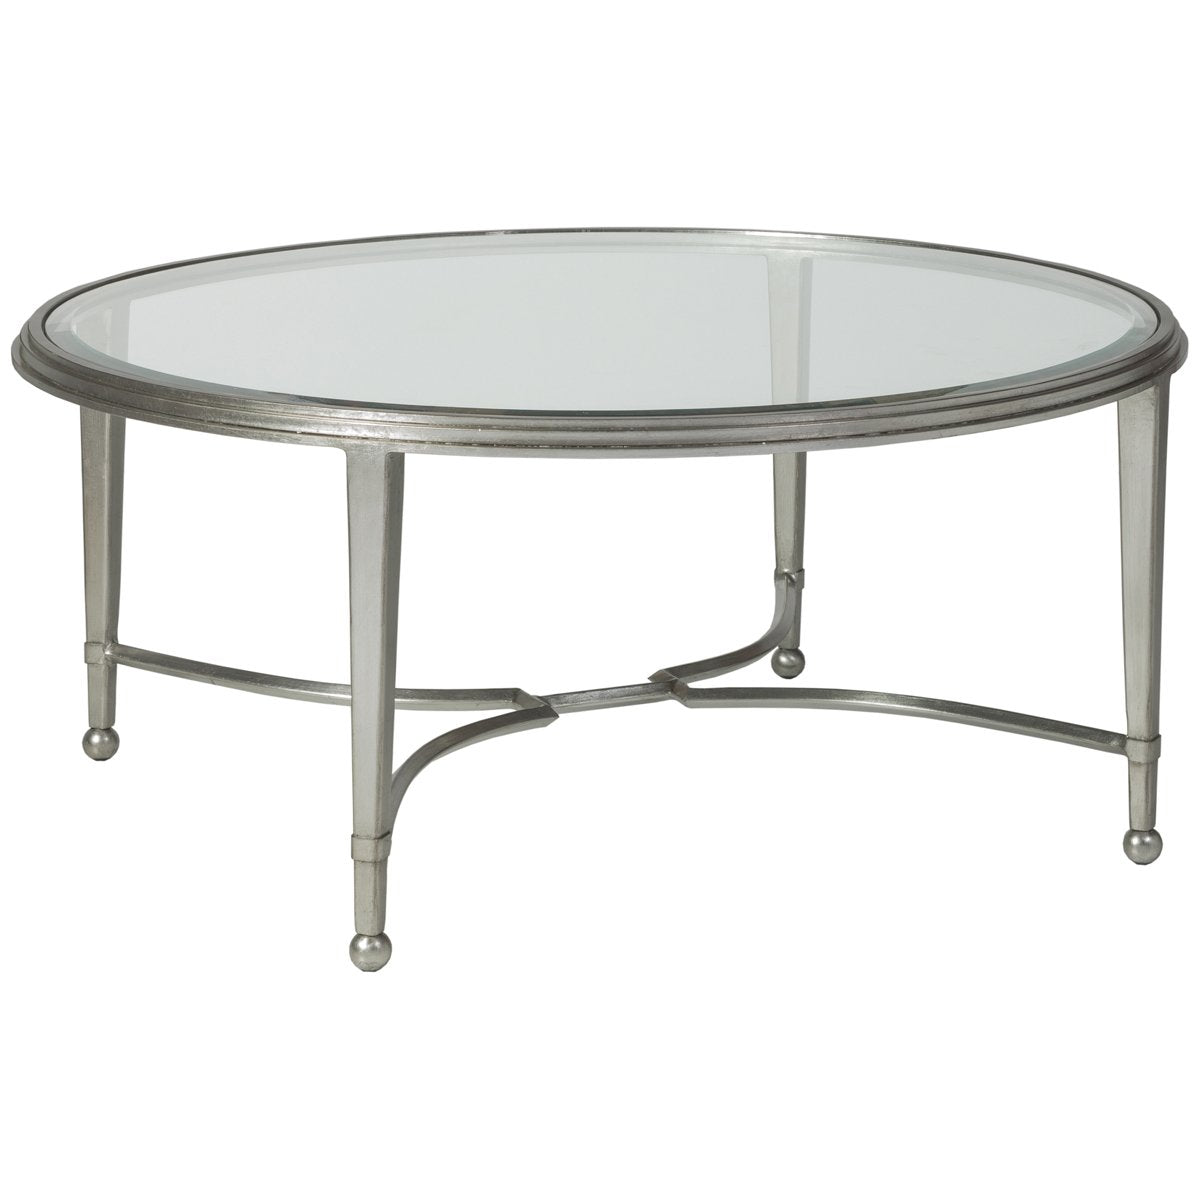 Artistica Home Sangiovese Round Cocktail Table 2011-943